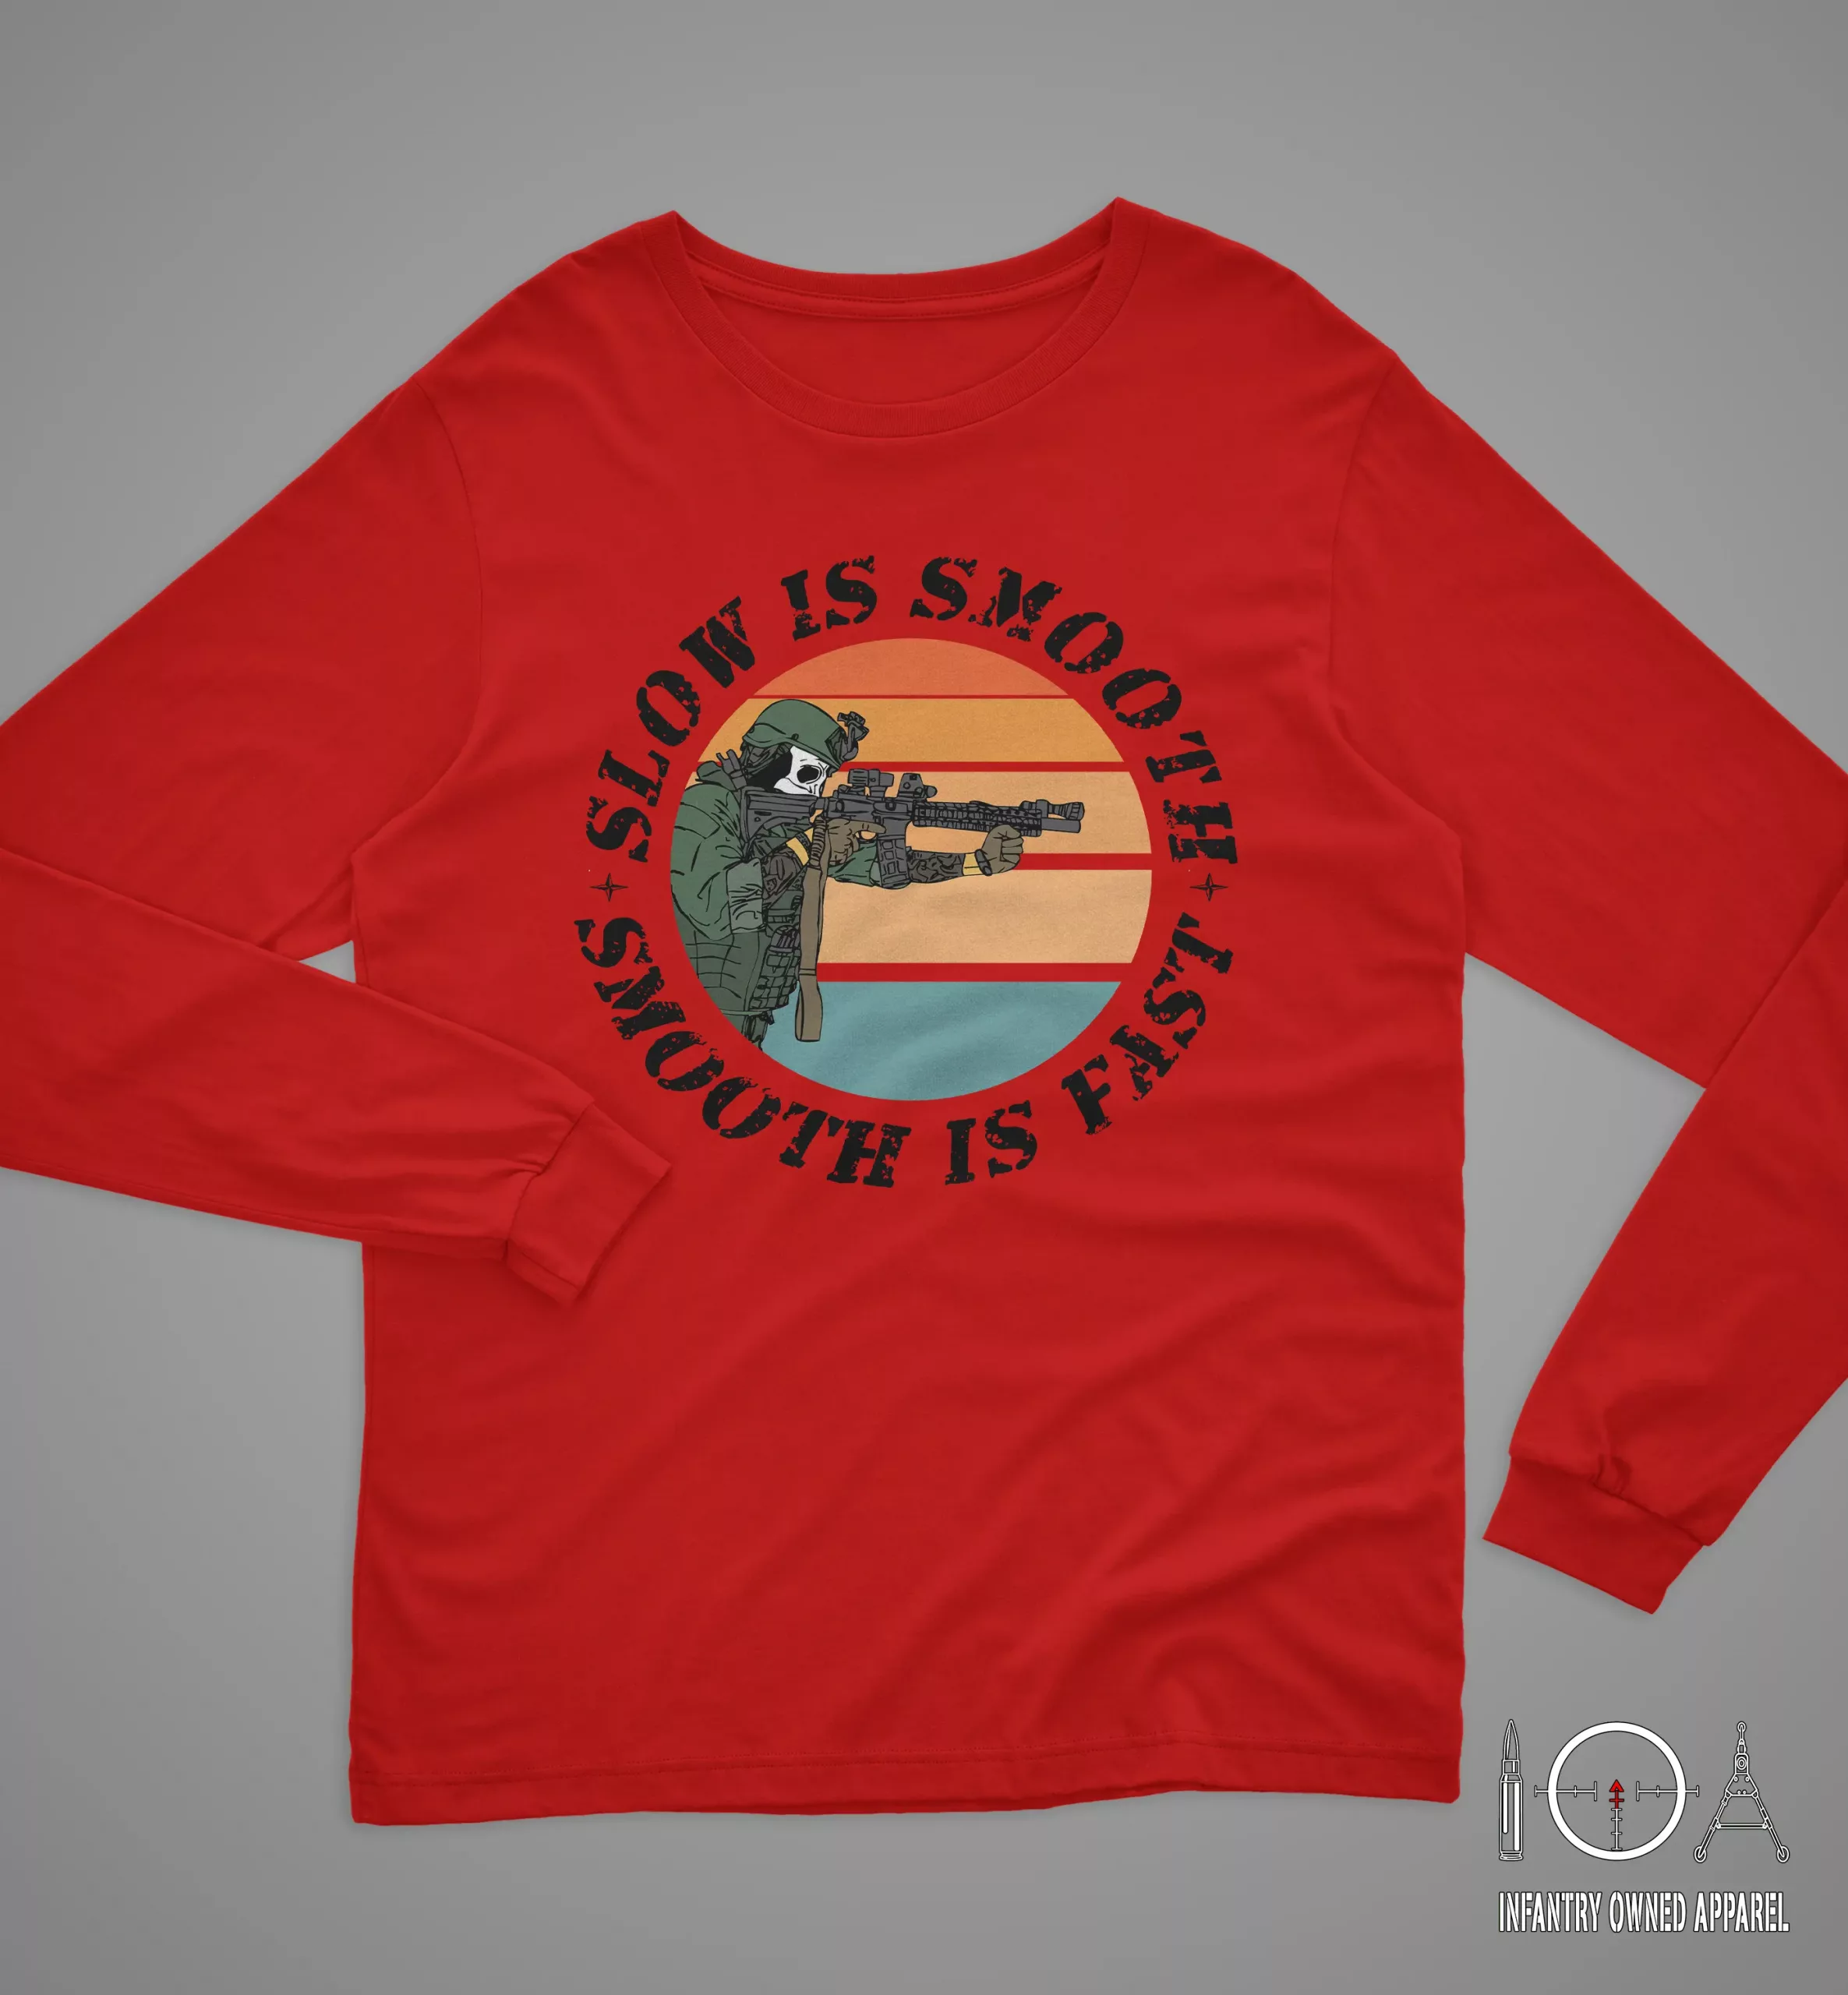 Slow is Smooth Smooth Fast - Apparel Infantry Tee Owned Long Sleeve is